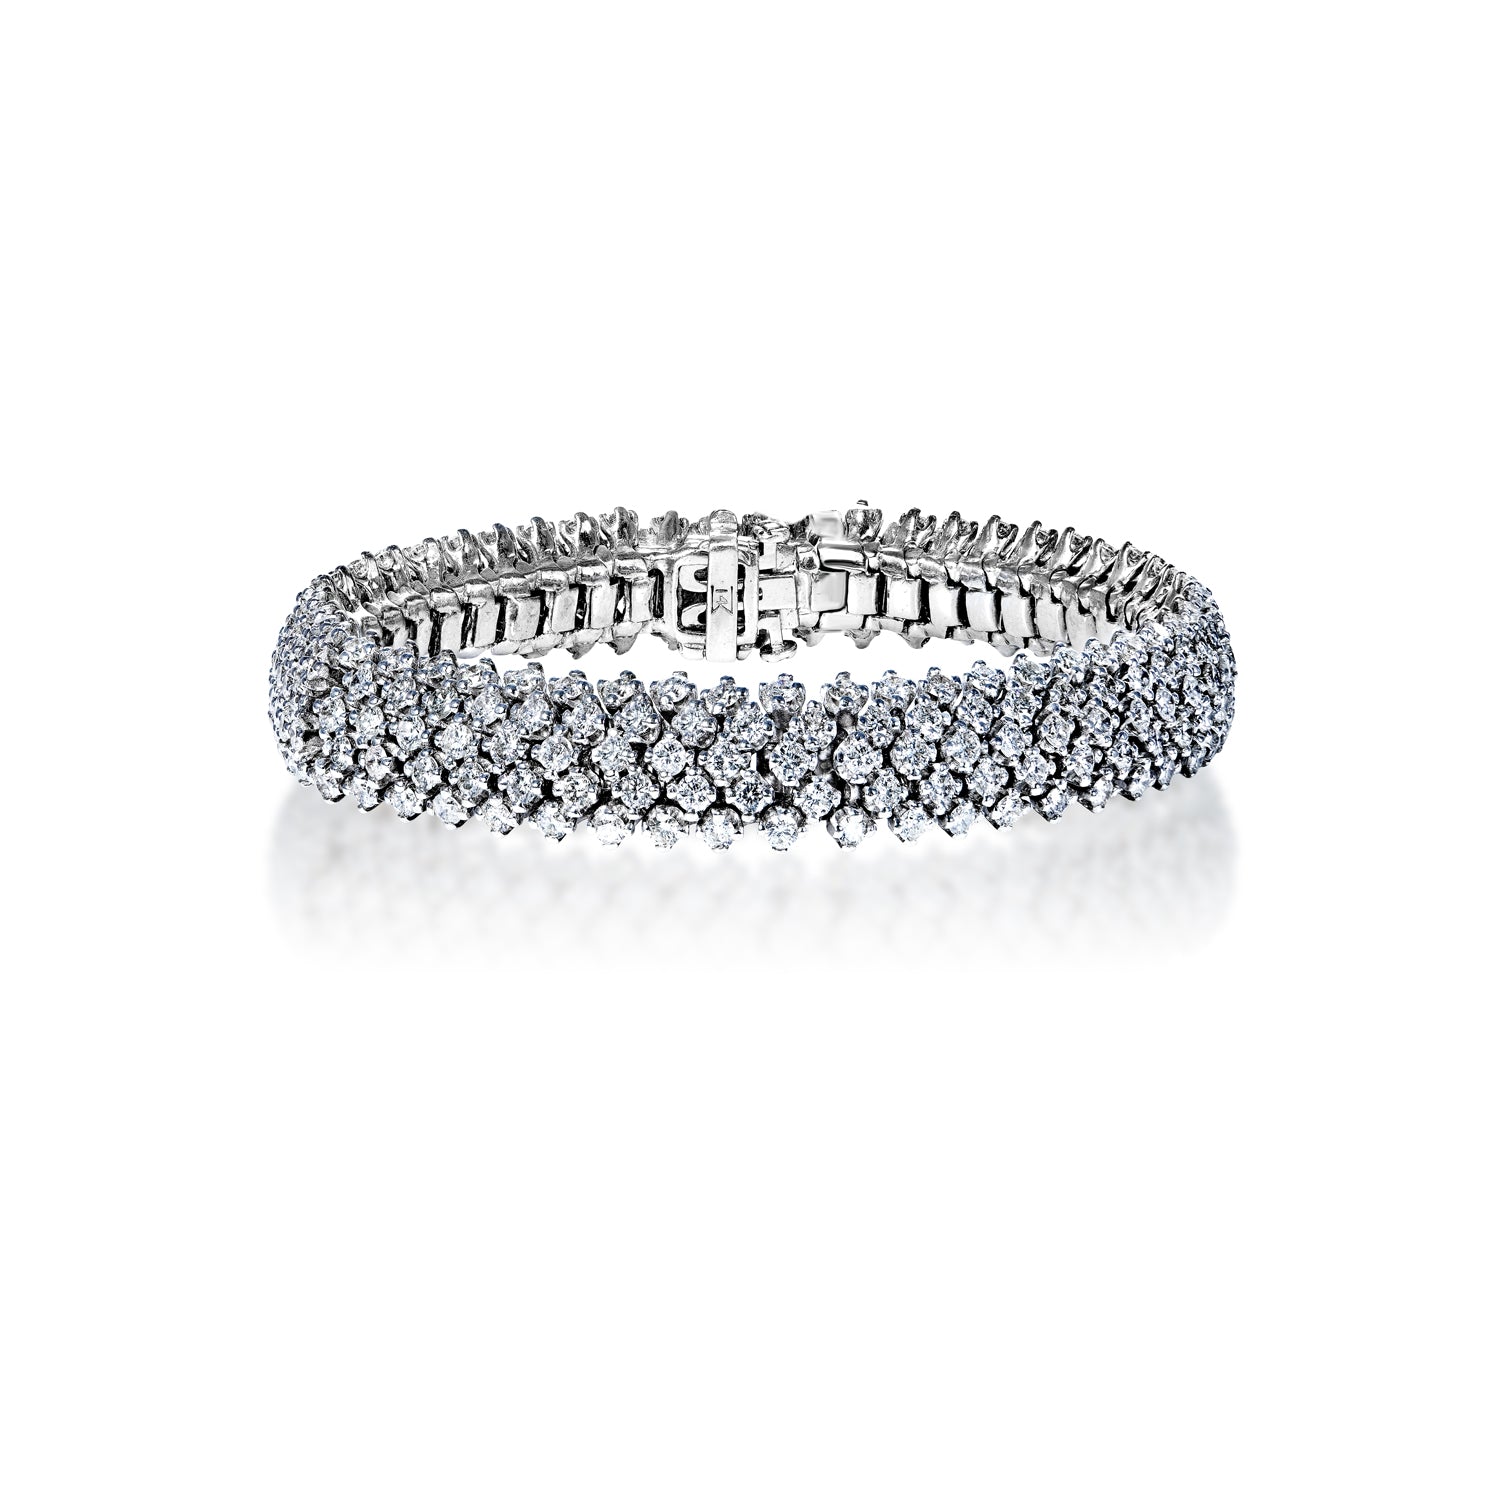 Sawyer 11 Carat Earth Mined Round Brilliant 3 Rows Diamond Bracelet in 18k White Gold Full View